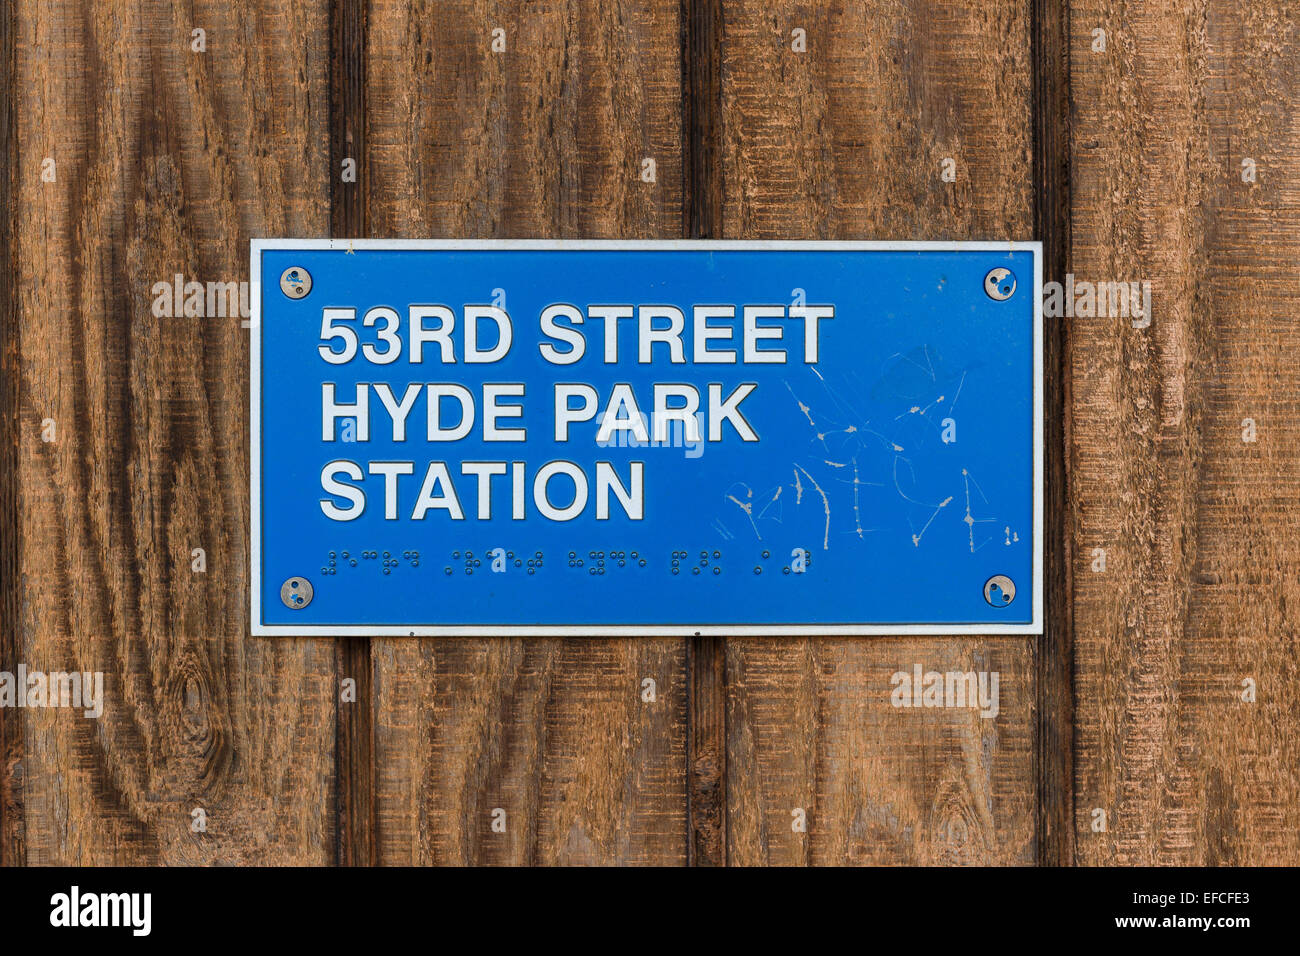 Station sign for the 53rd Street Hyde Park Metra station in Chicago, IL, USA. Stock Photo